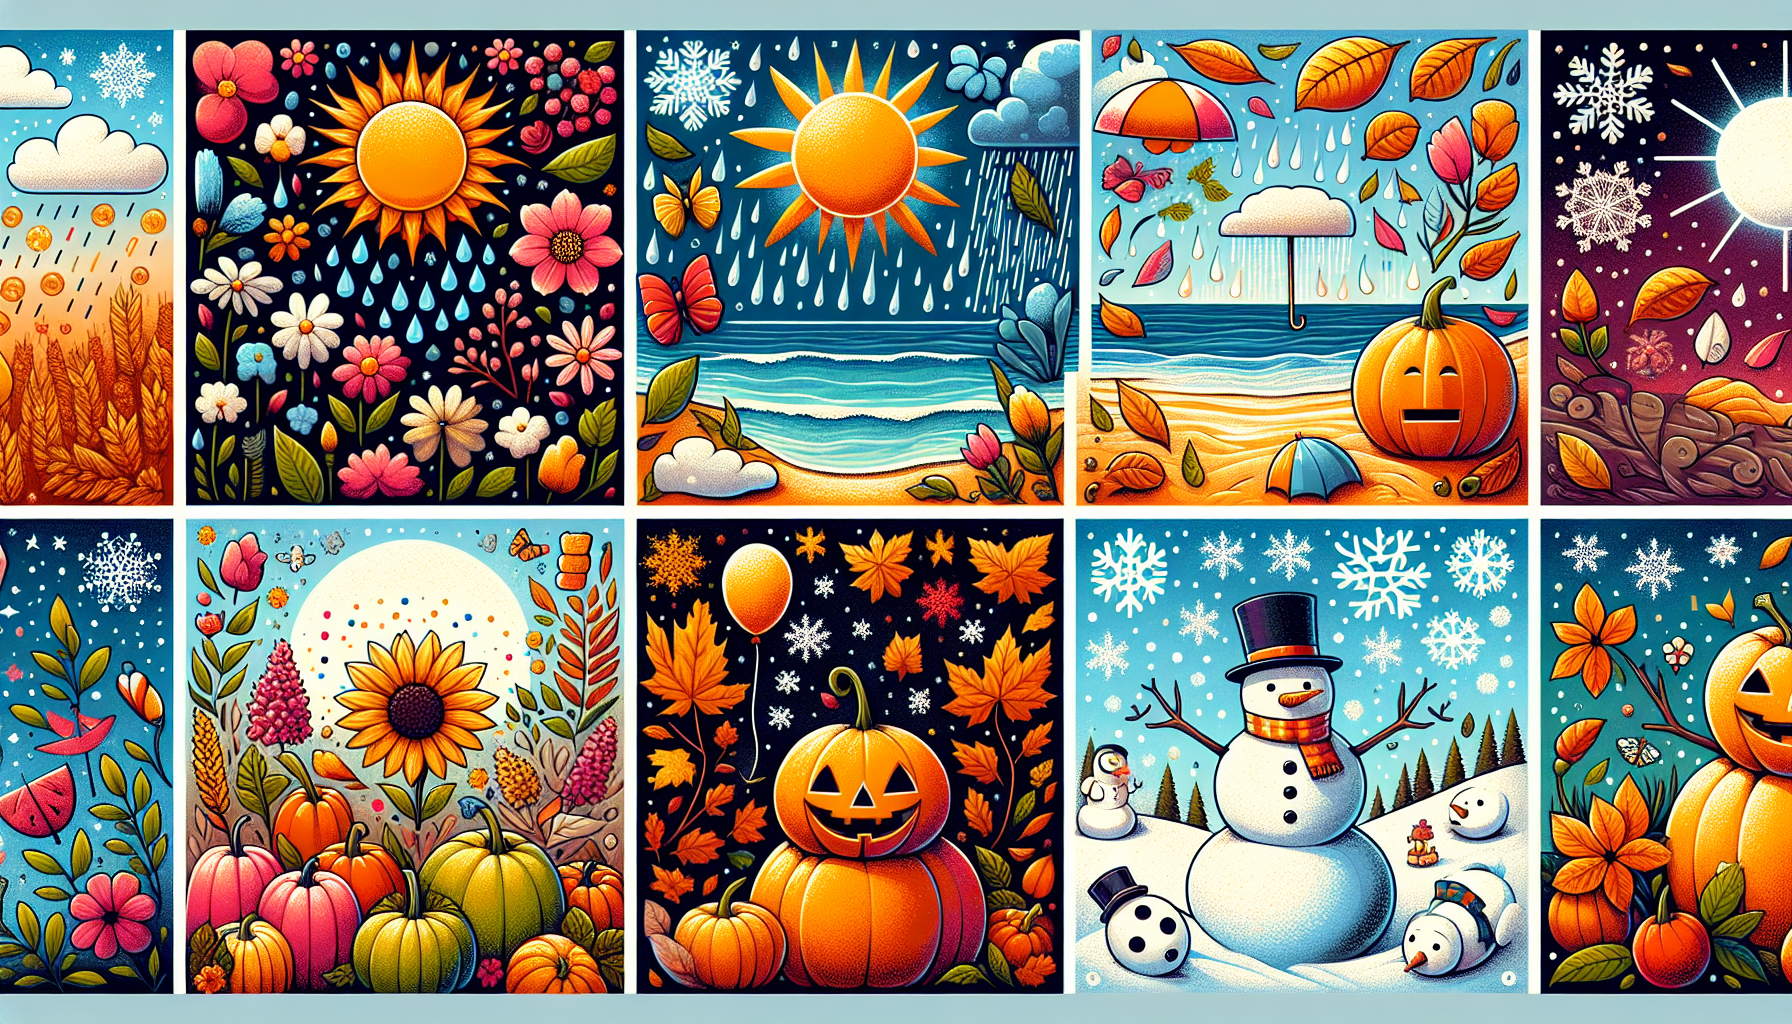 Colorful illustration of seasonal lottery promotions